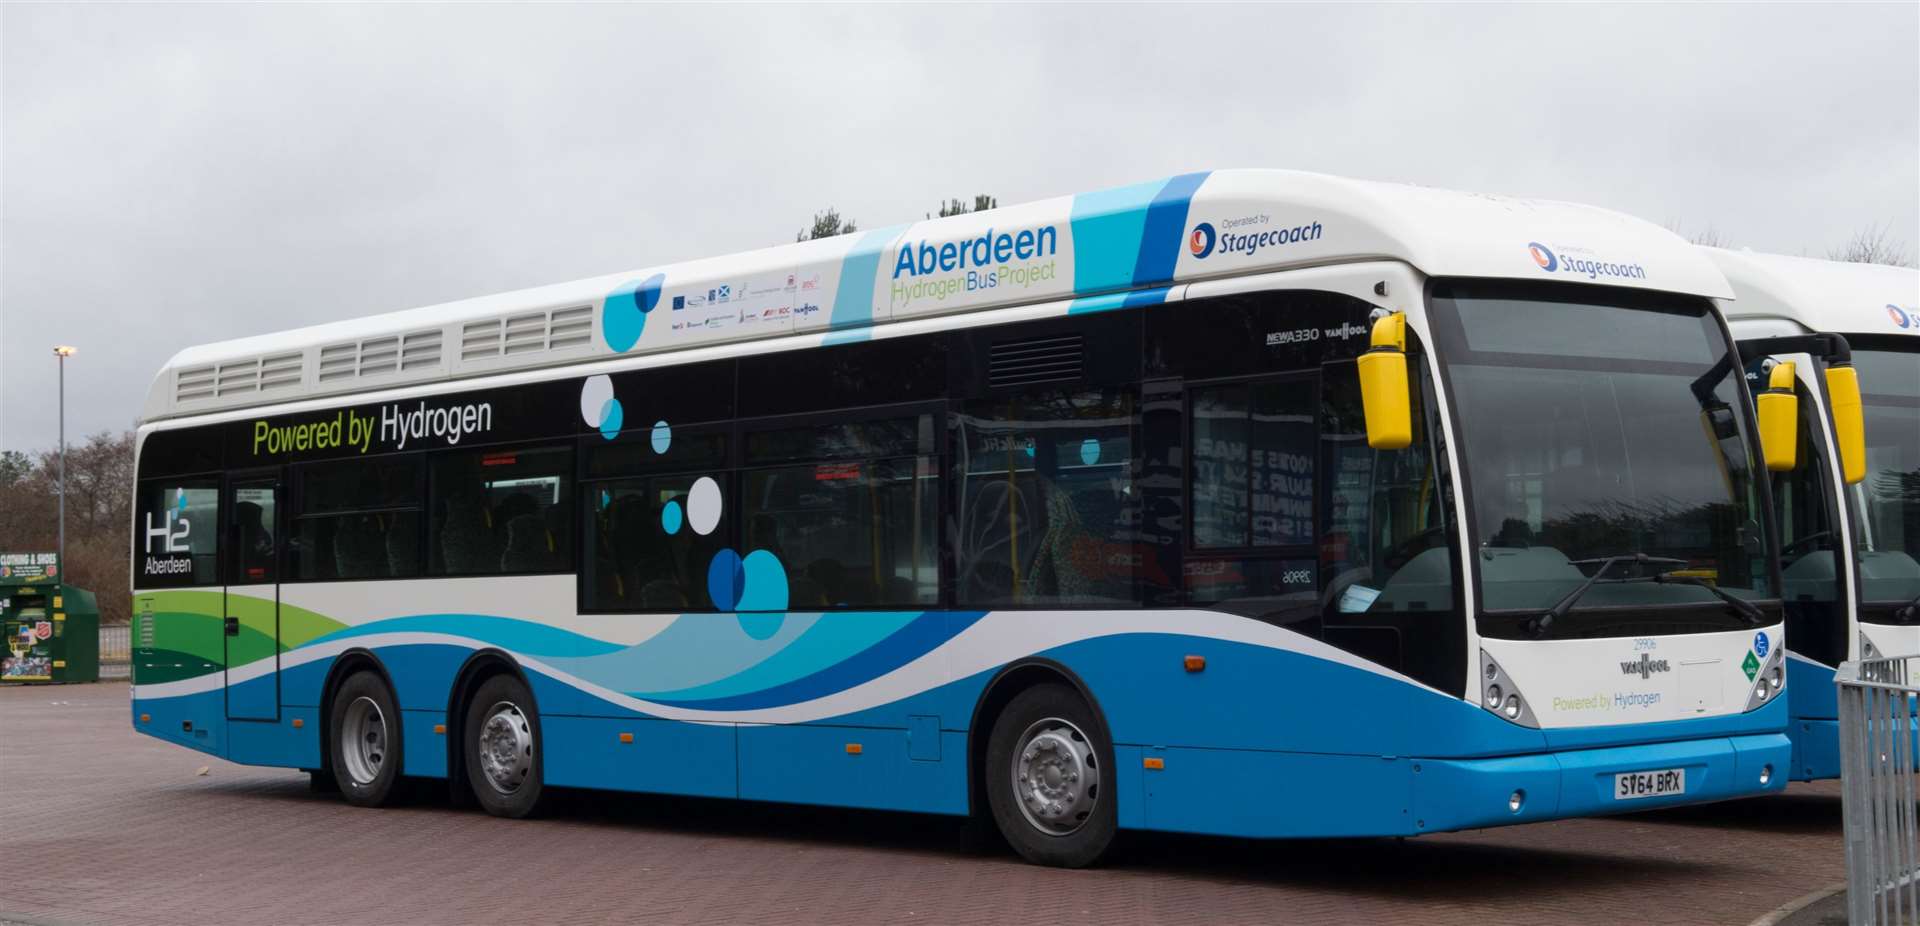 The Hydrogen bus will be converted into a learning facility